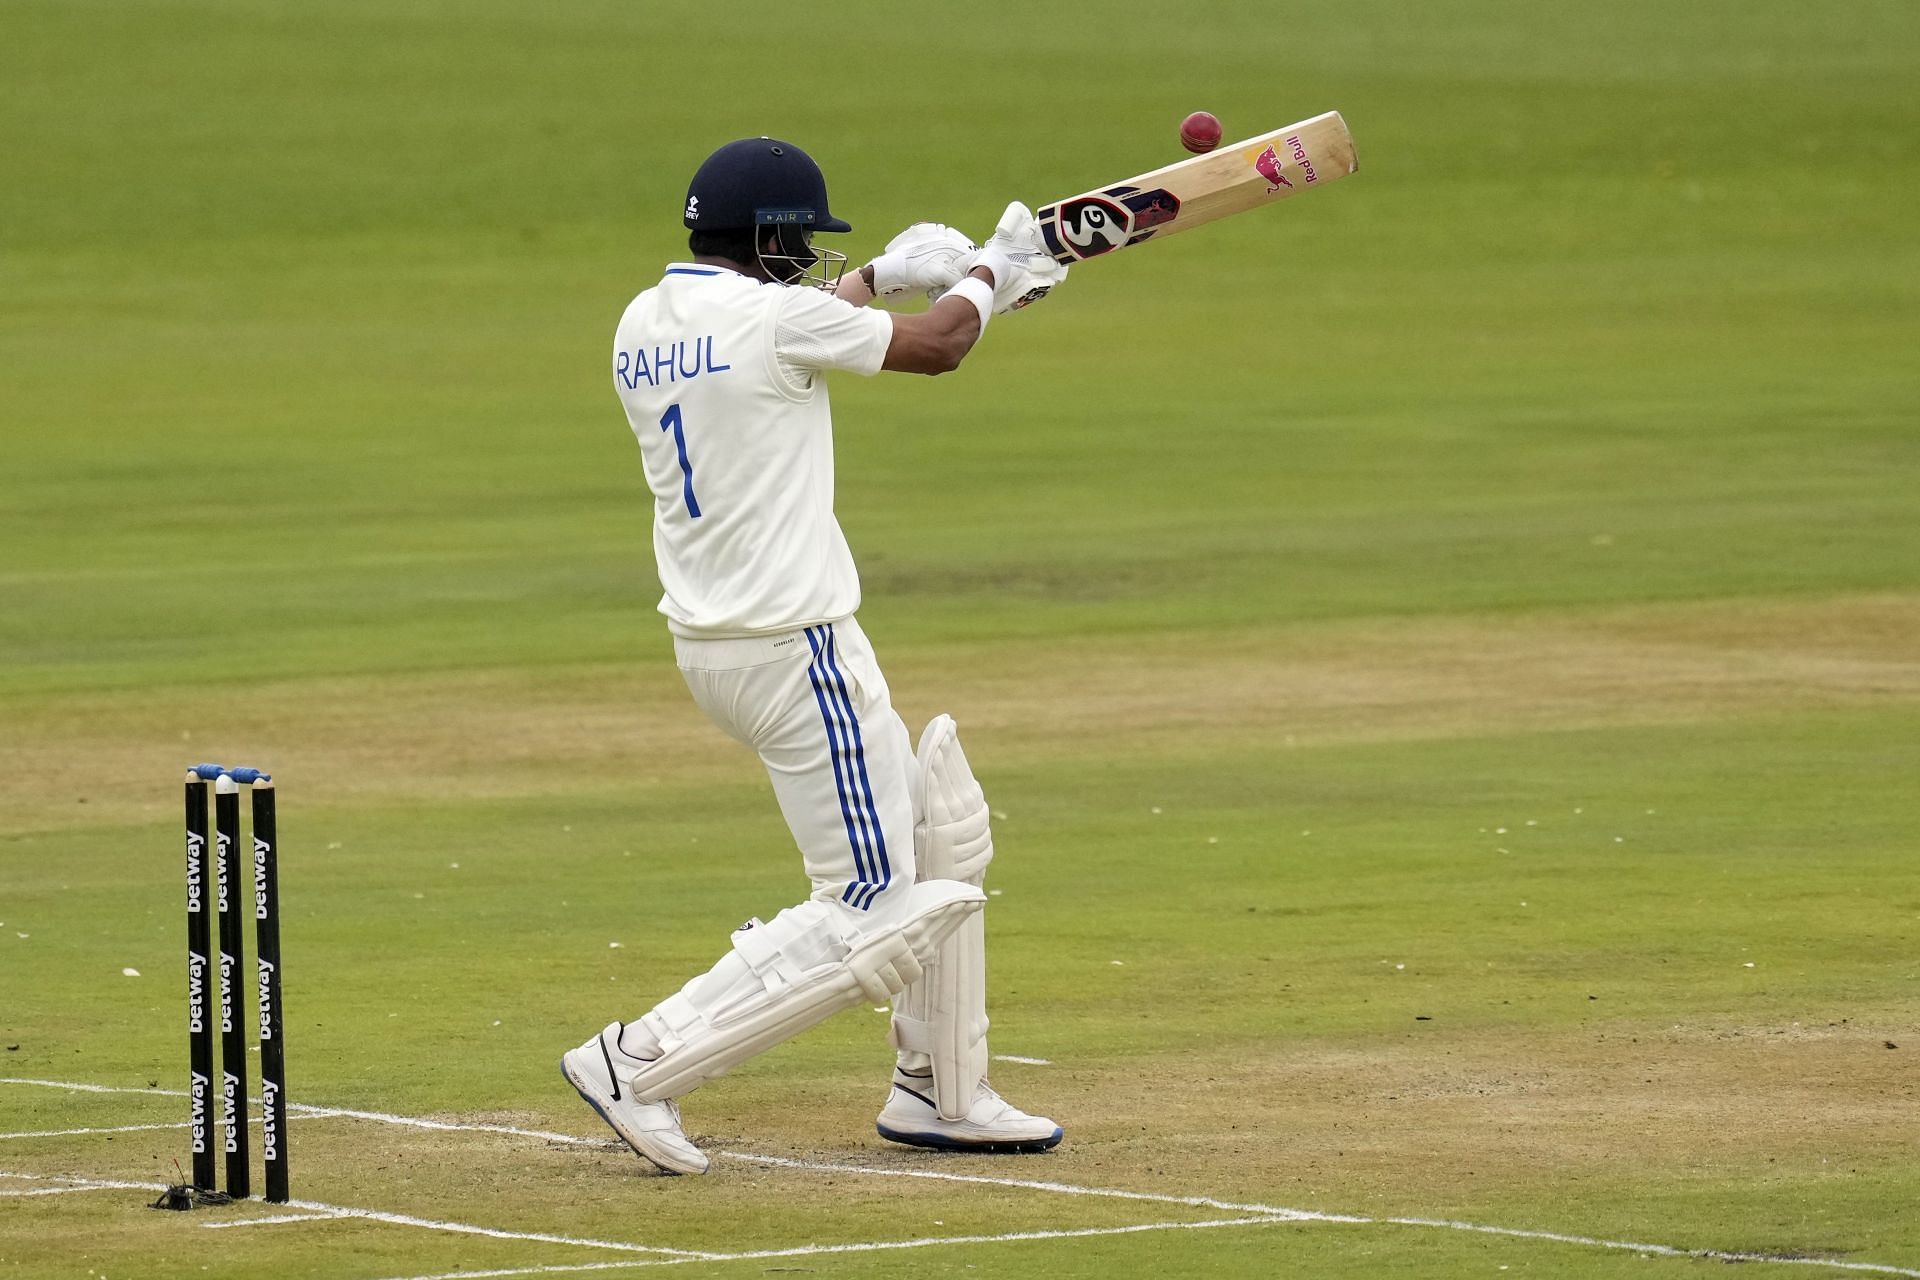 KL Rahul scored a defiant ton in the Centurion Test. (Pic: AP)